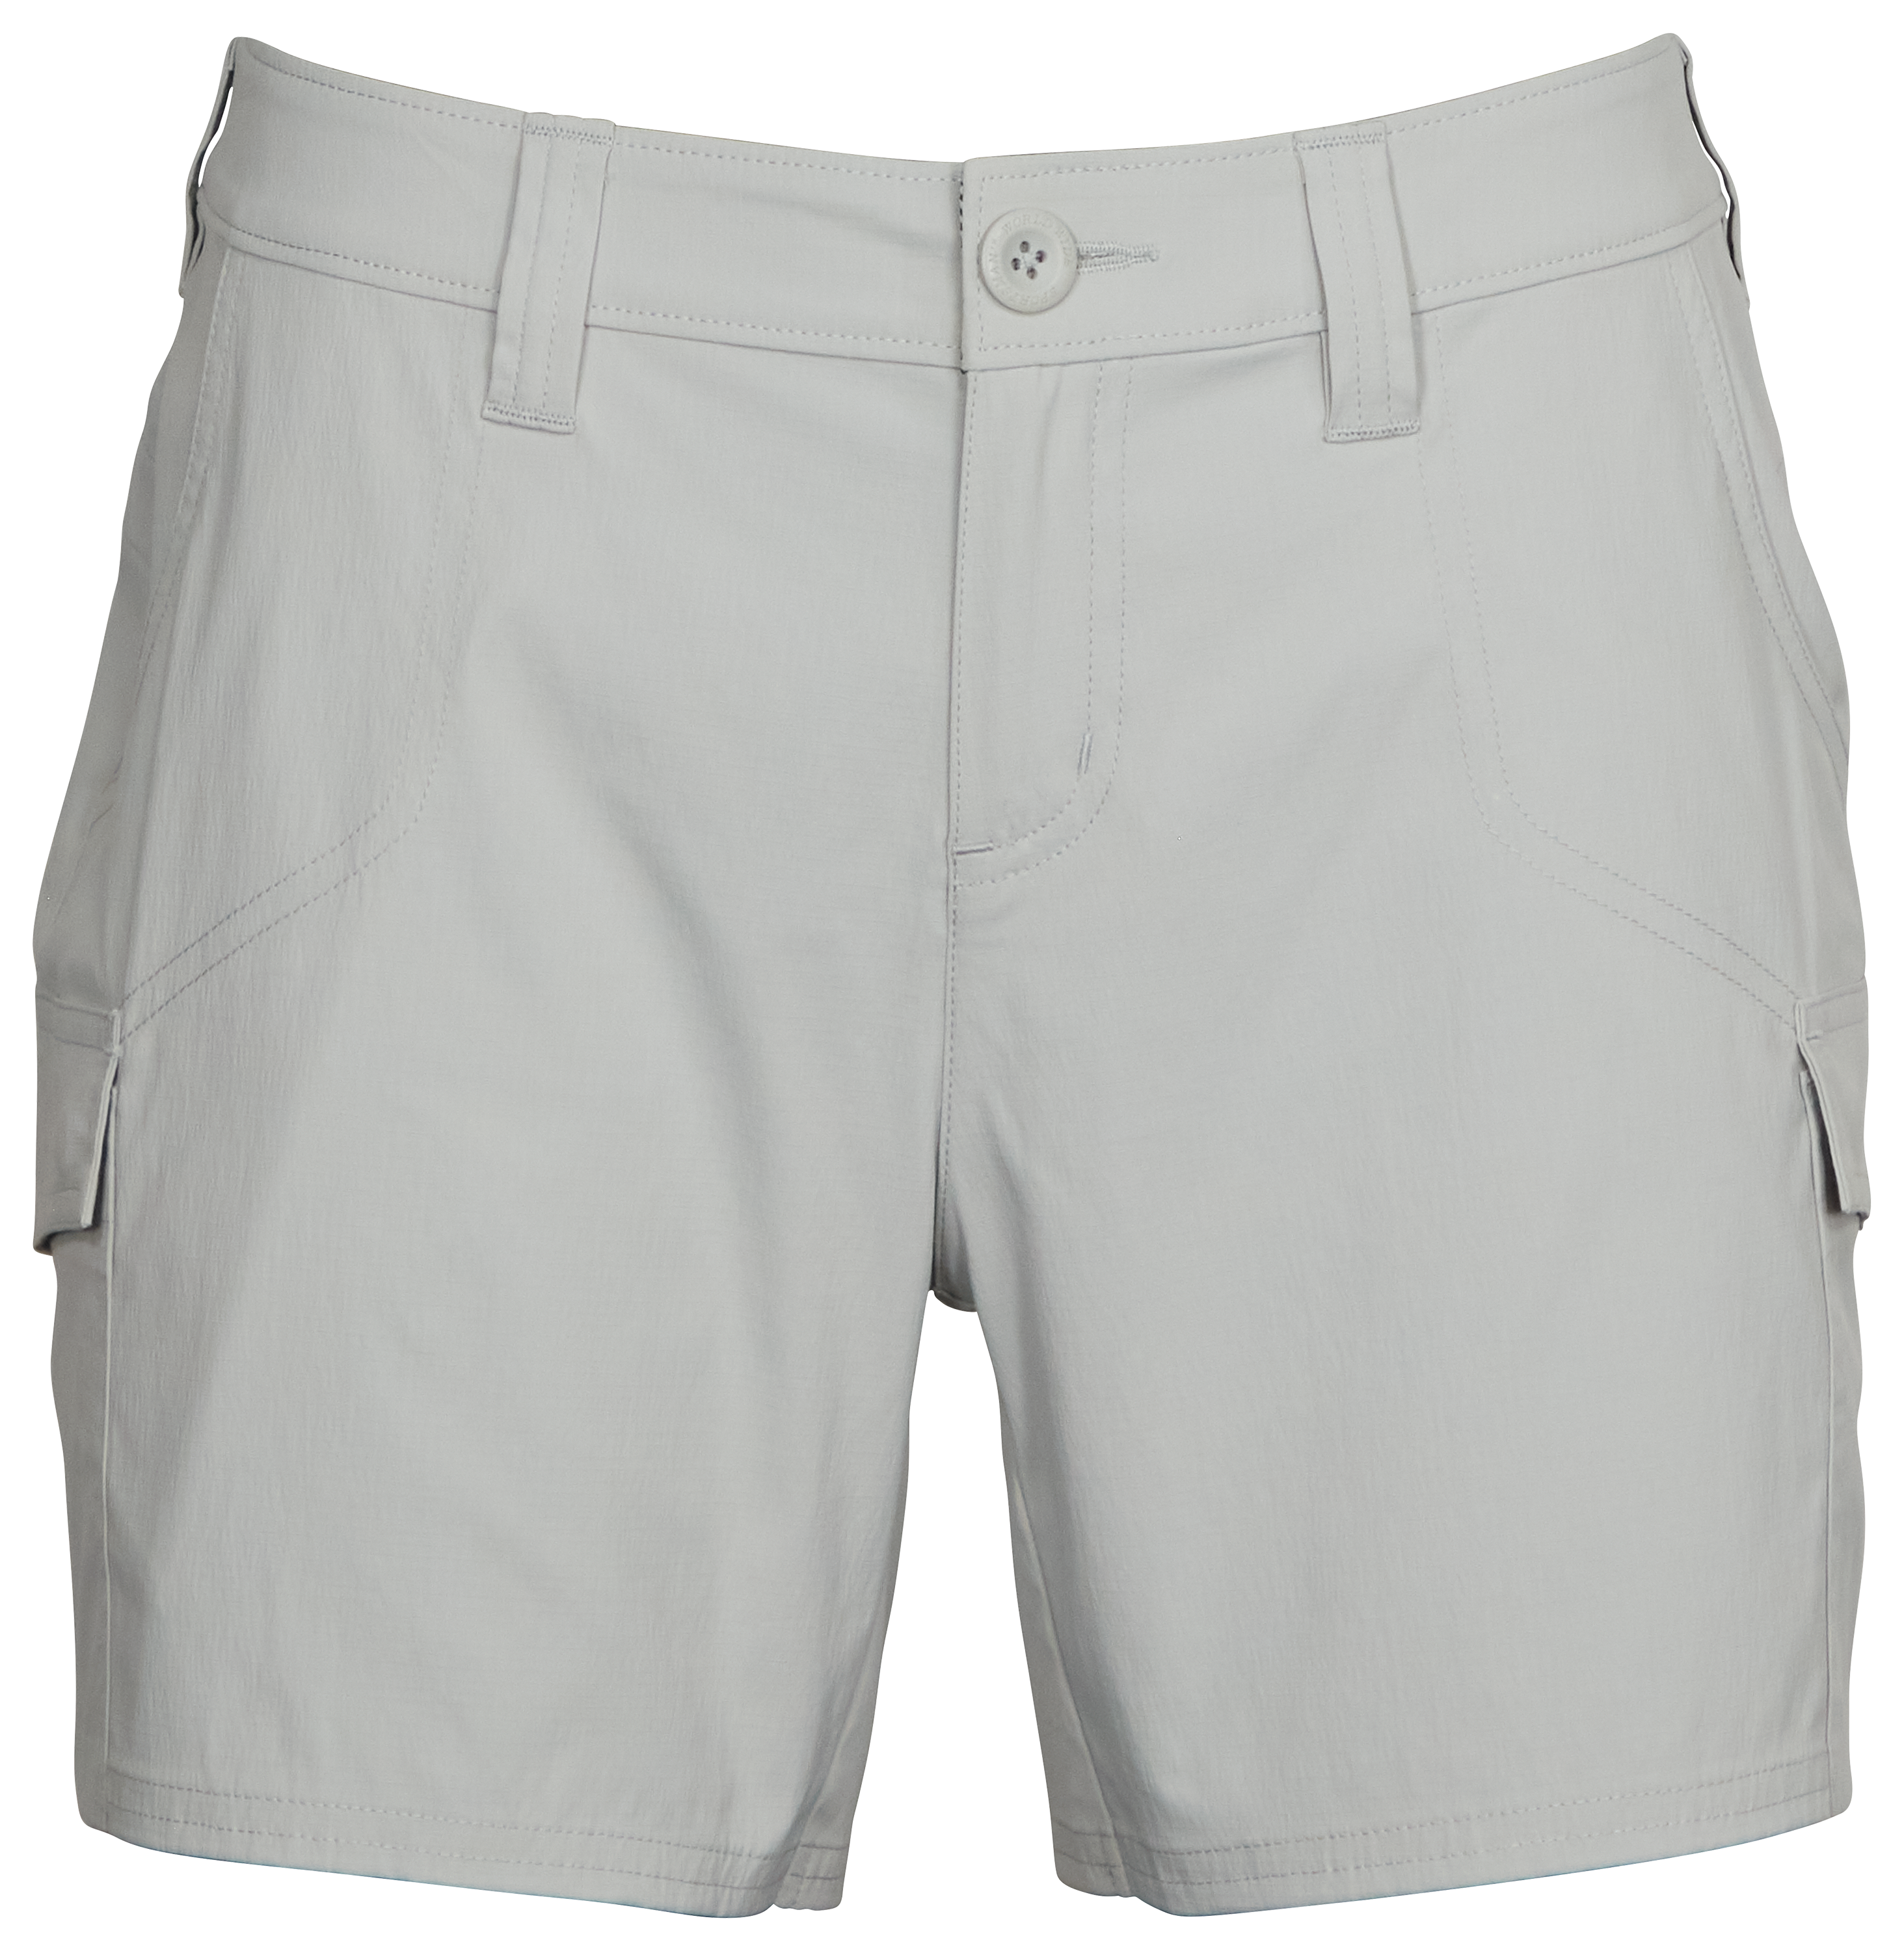 World Wide Sportsman Ripstop Cargo Shorts for Ladies - High Rise - 6